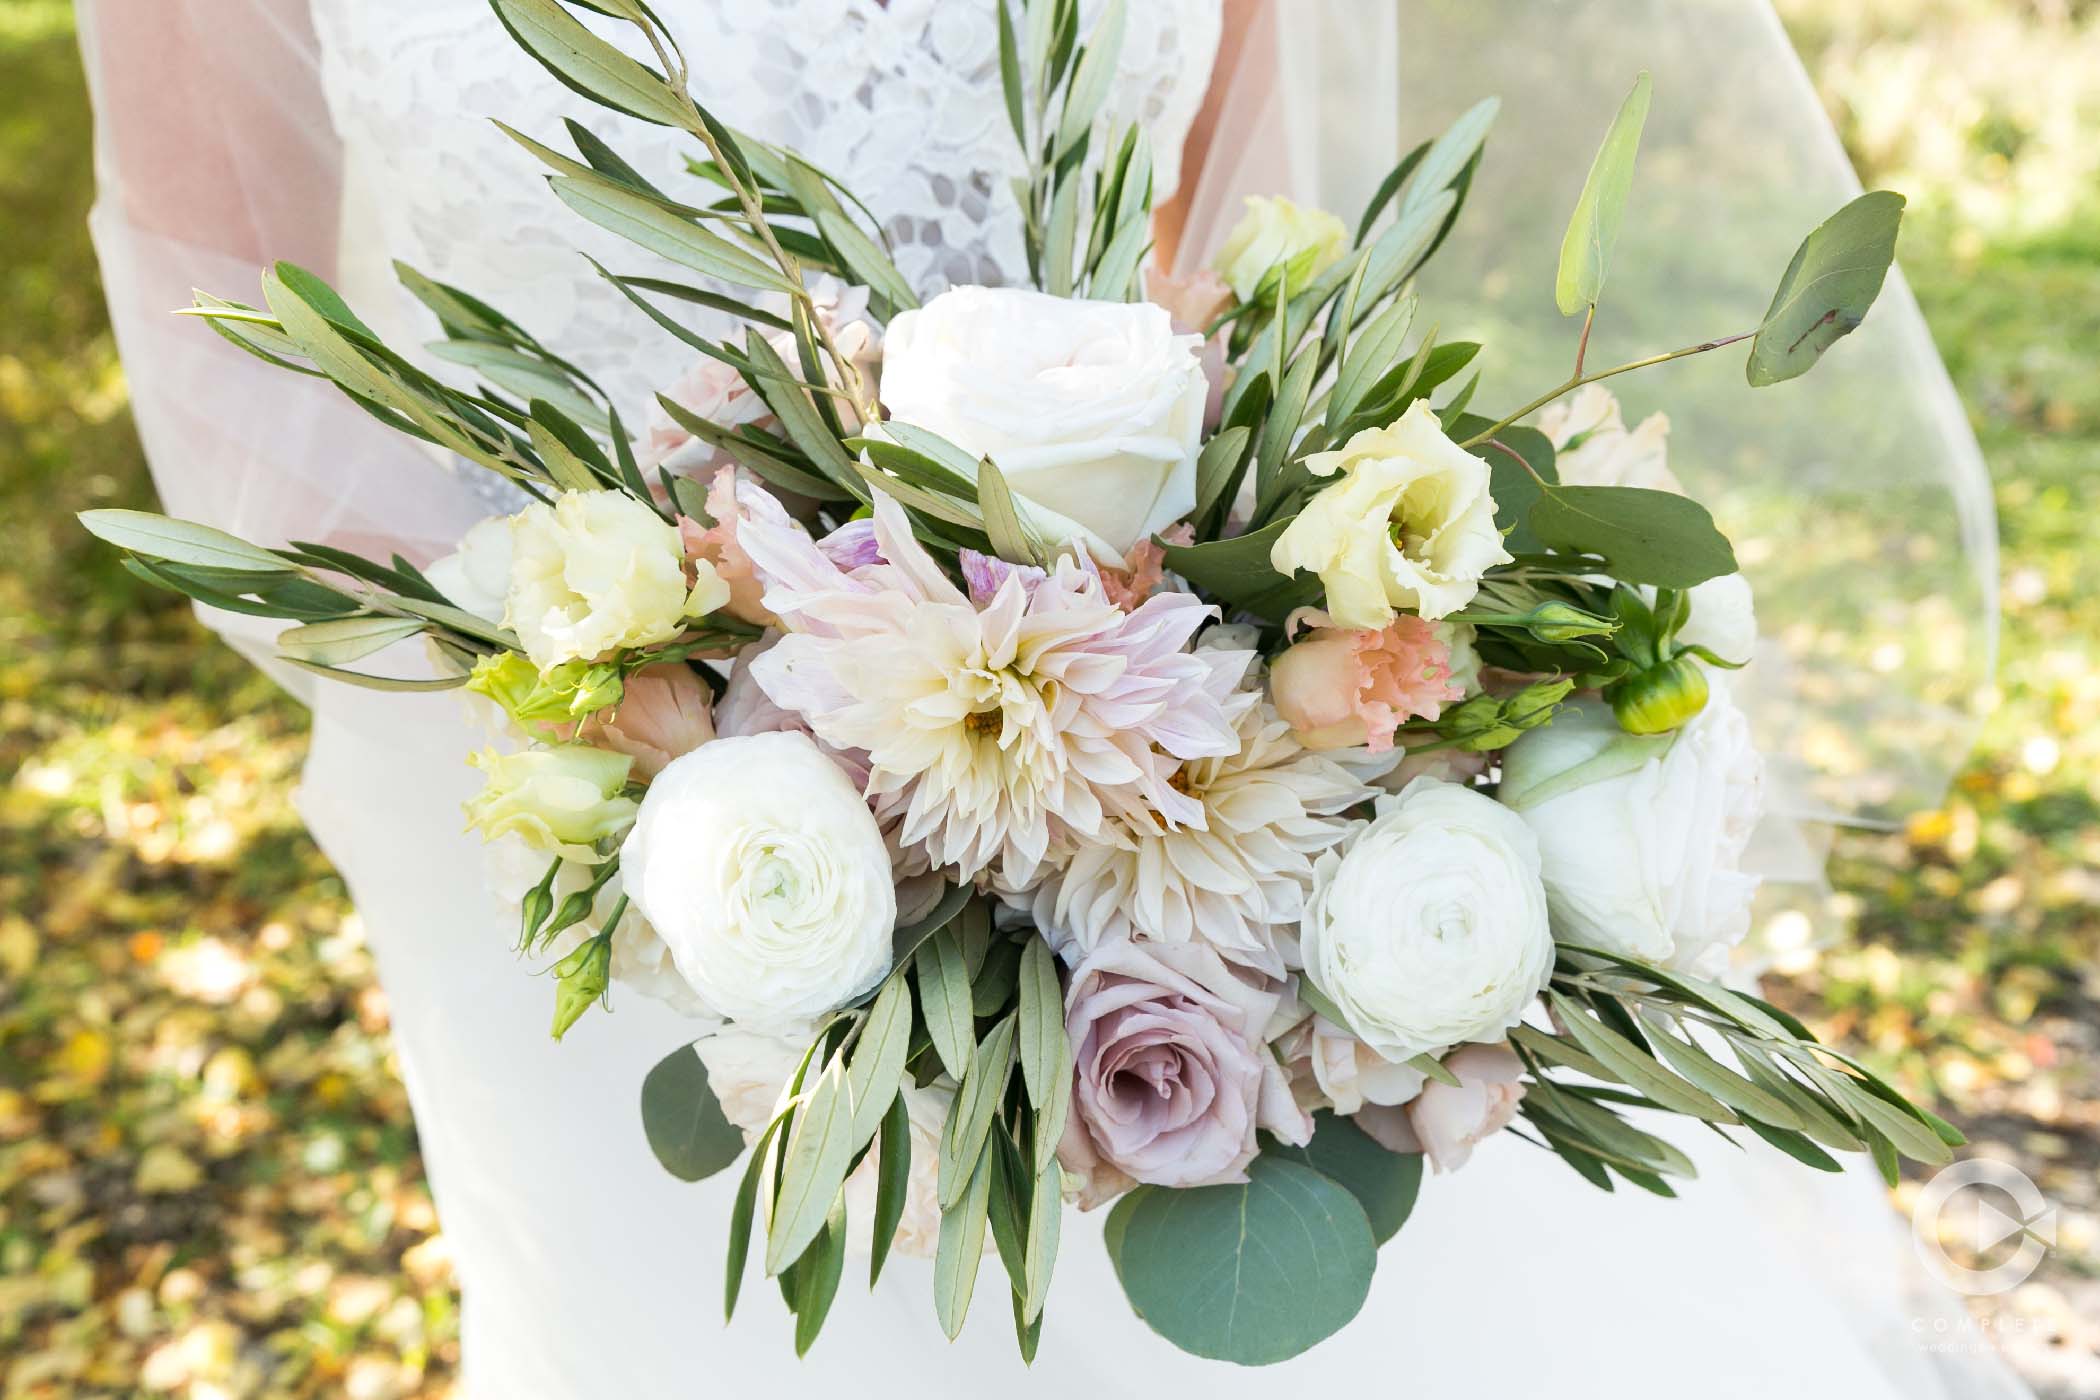 The Best Bouquet Shape for Your Wedding Dress